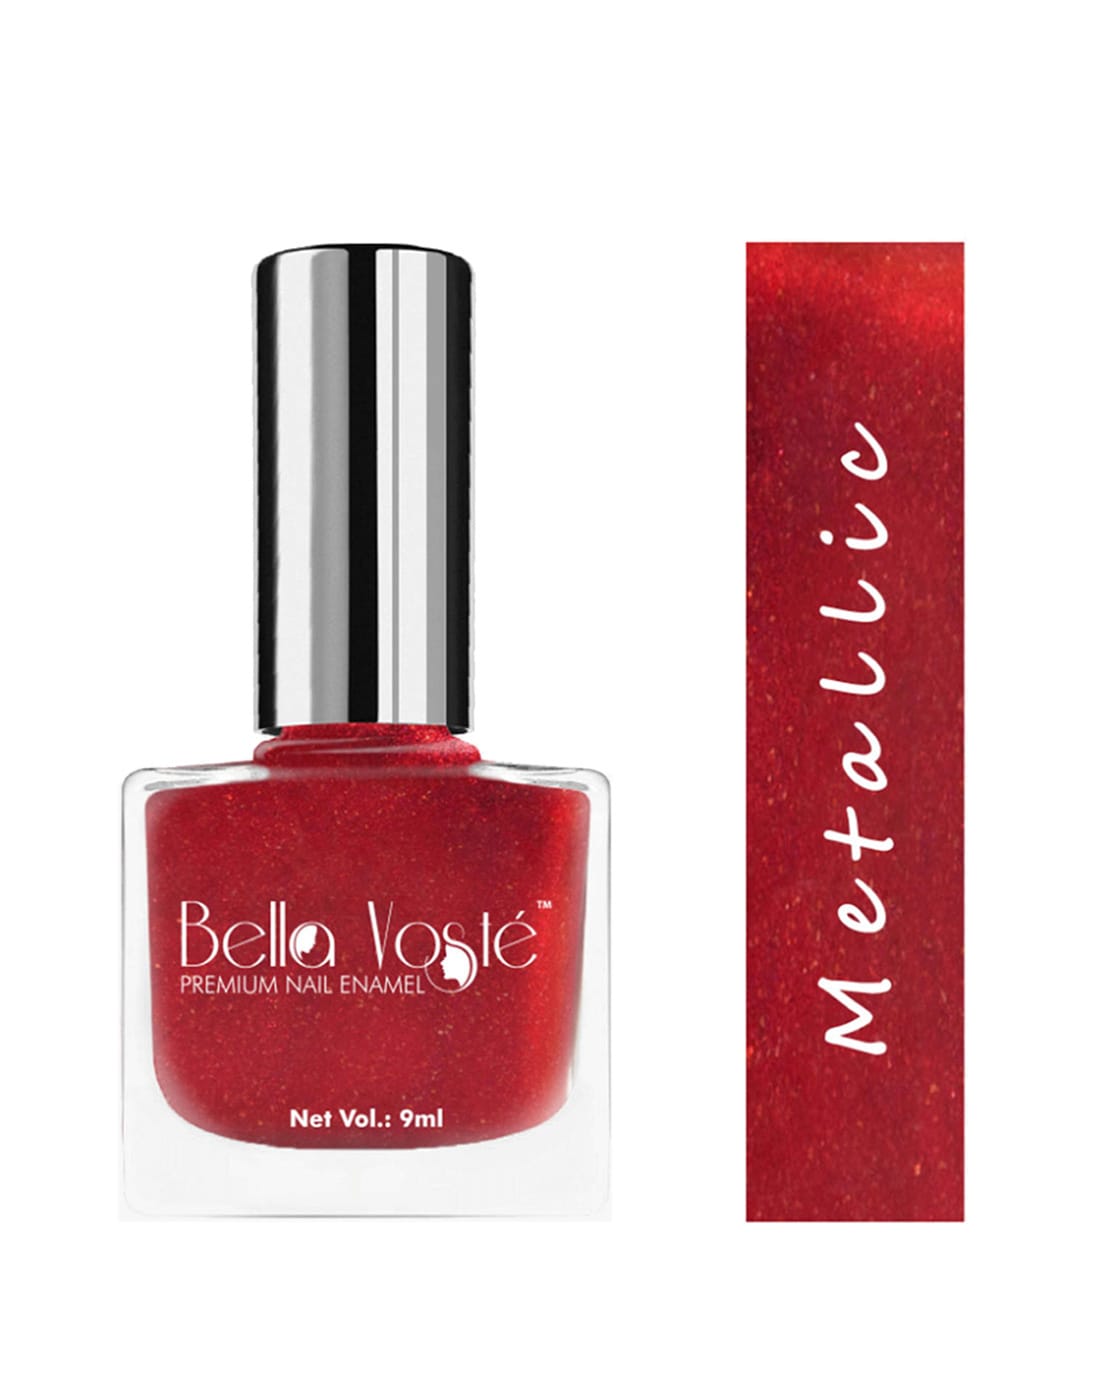 Grab This Beautiful Nail Paint By Bella Voste | LBB